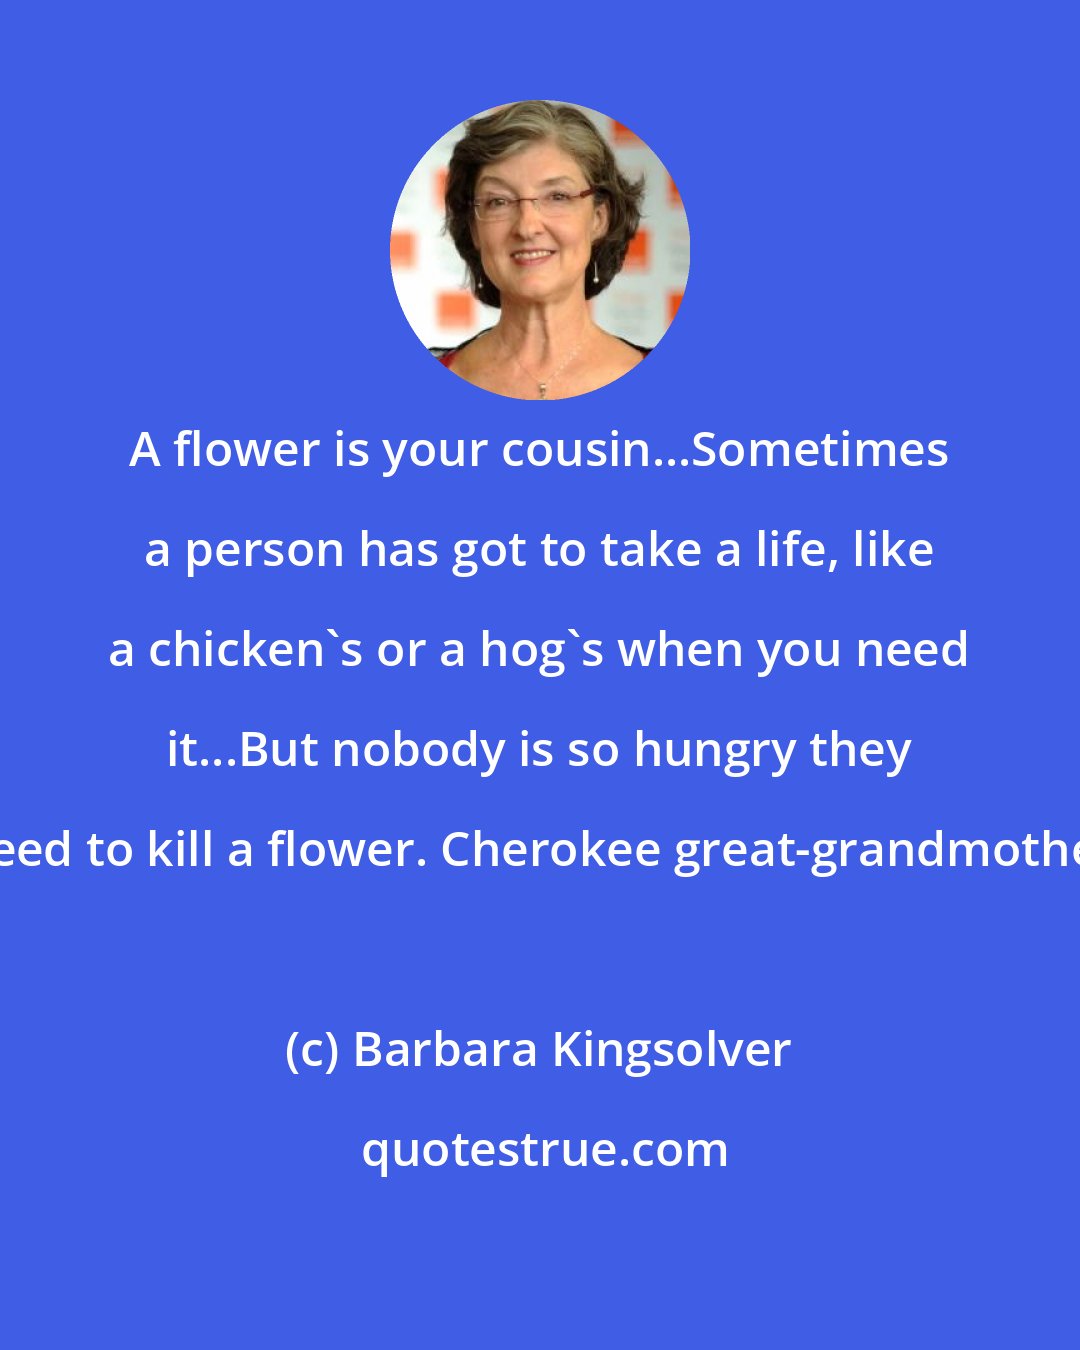 Barbara Kingsolver: A flower is your cousin...Sometimes a person has got to take a life, like a chicken's or a hog's when you need it...But nobody is so hungry they need to kill a flower. Cherokee great-grandmother